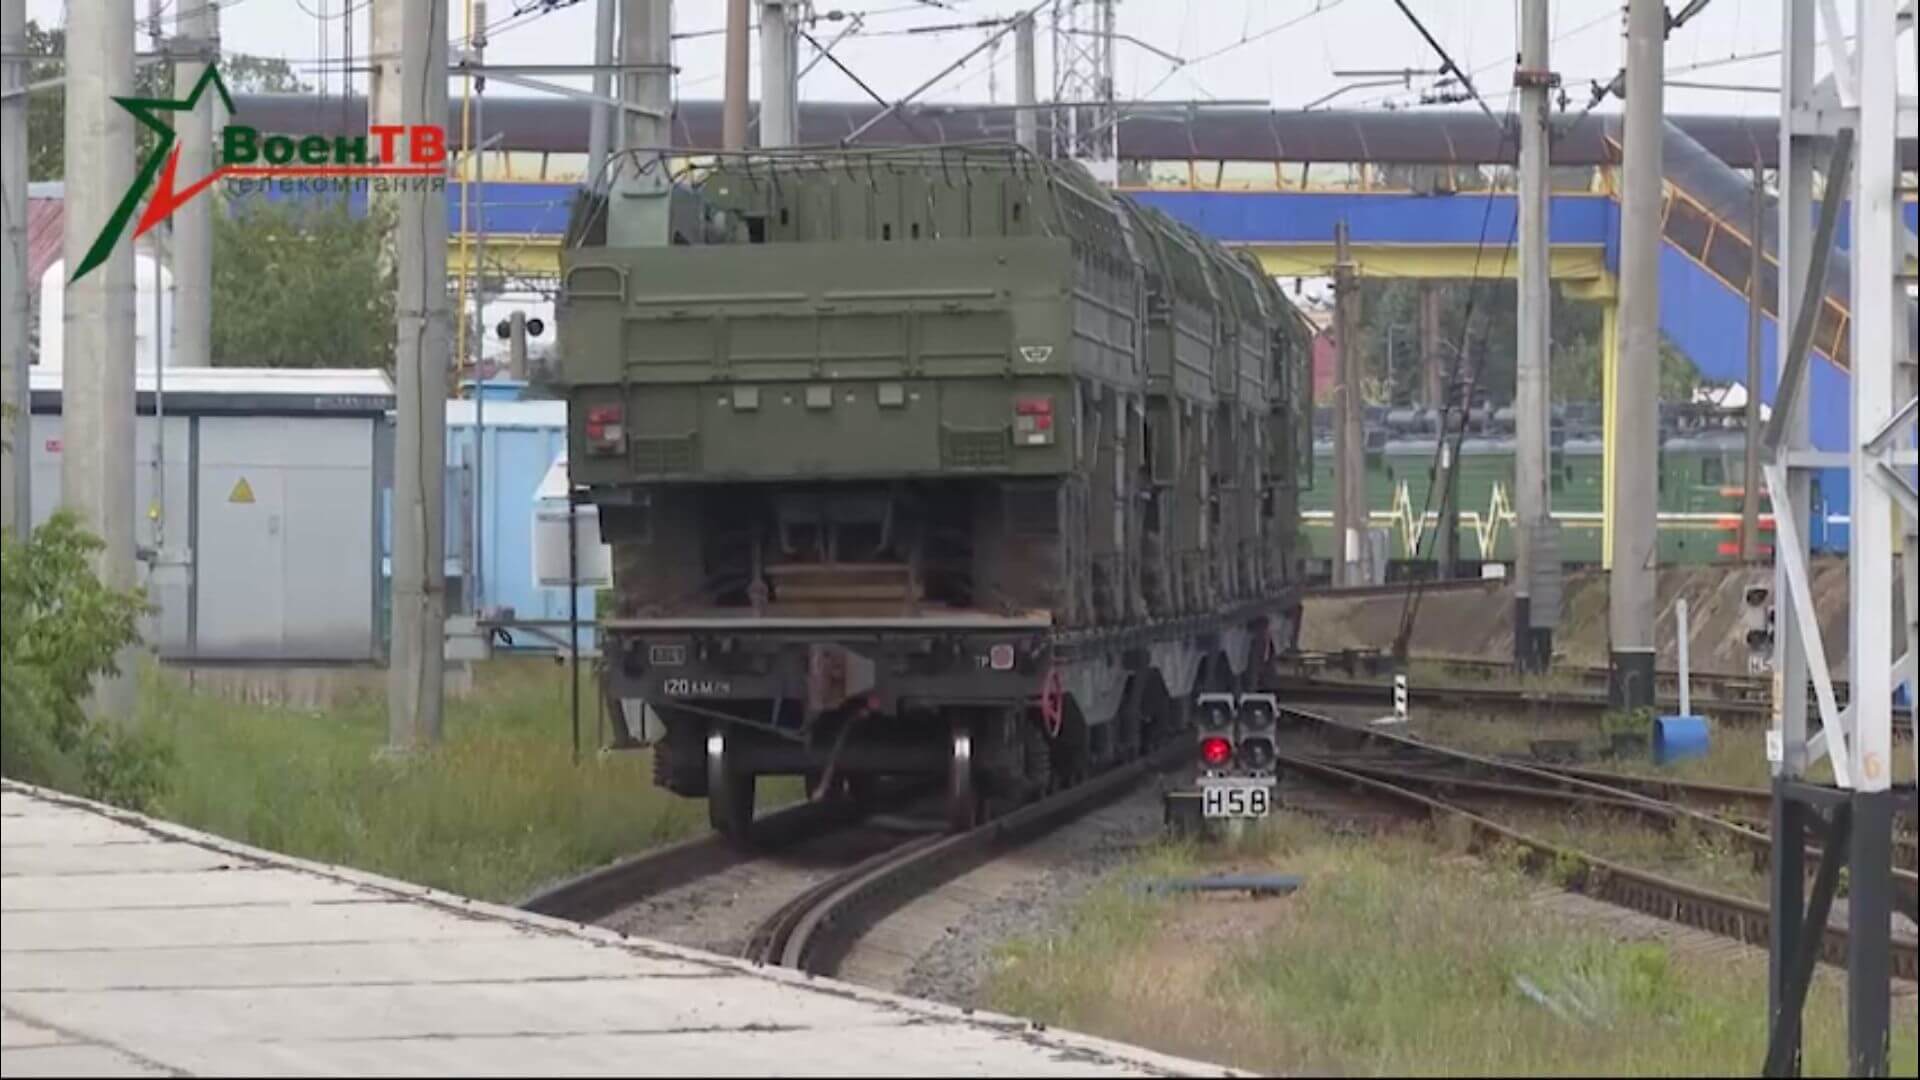 A batch of Iskander-M missile systems arrived in Belarus from Russia